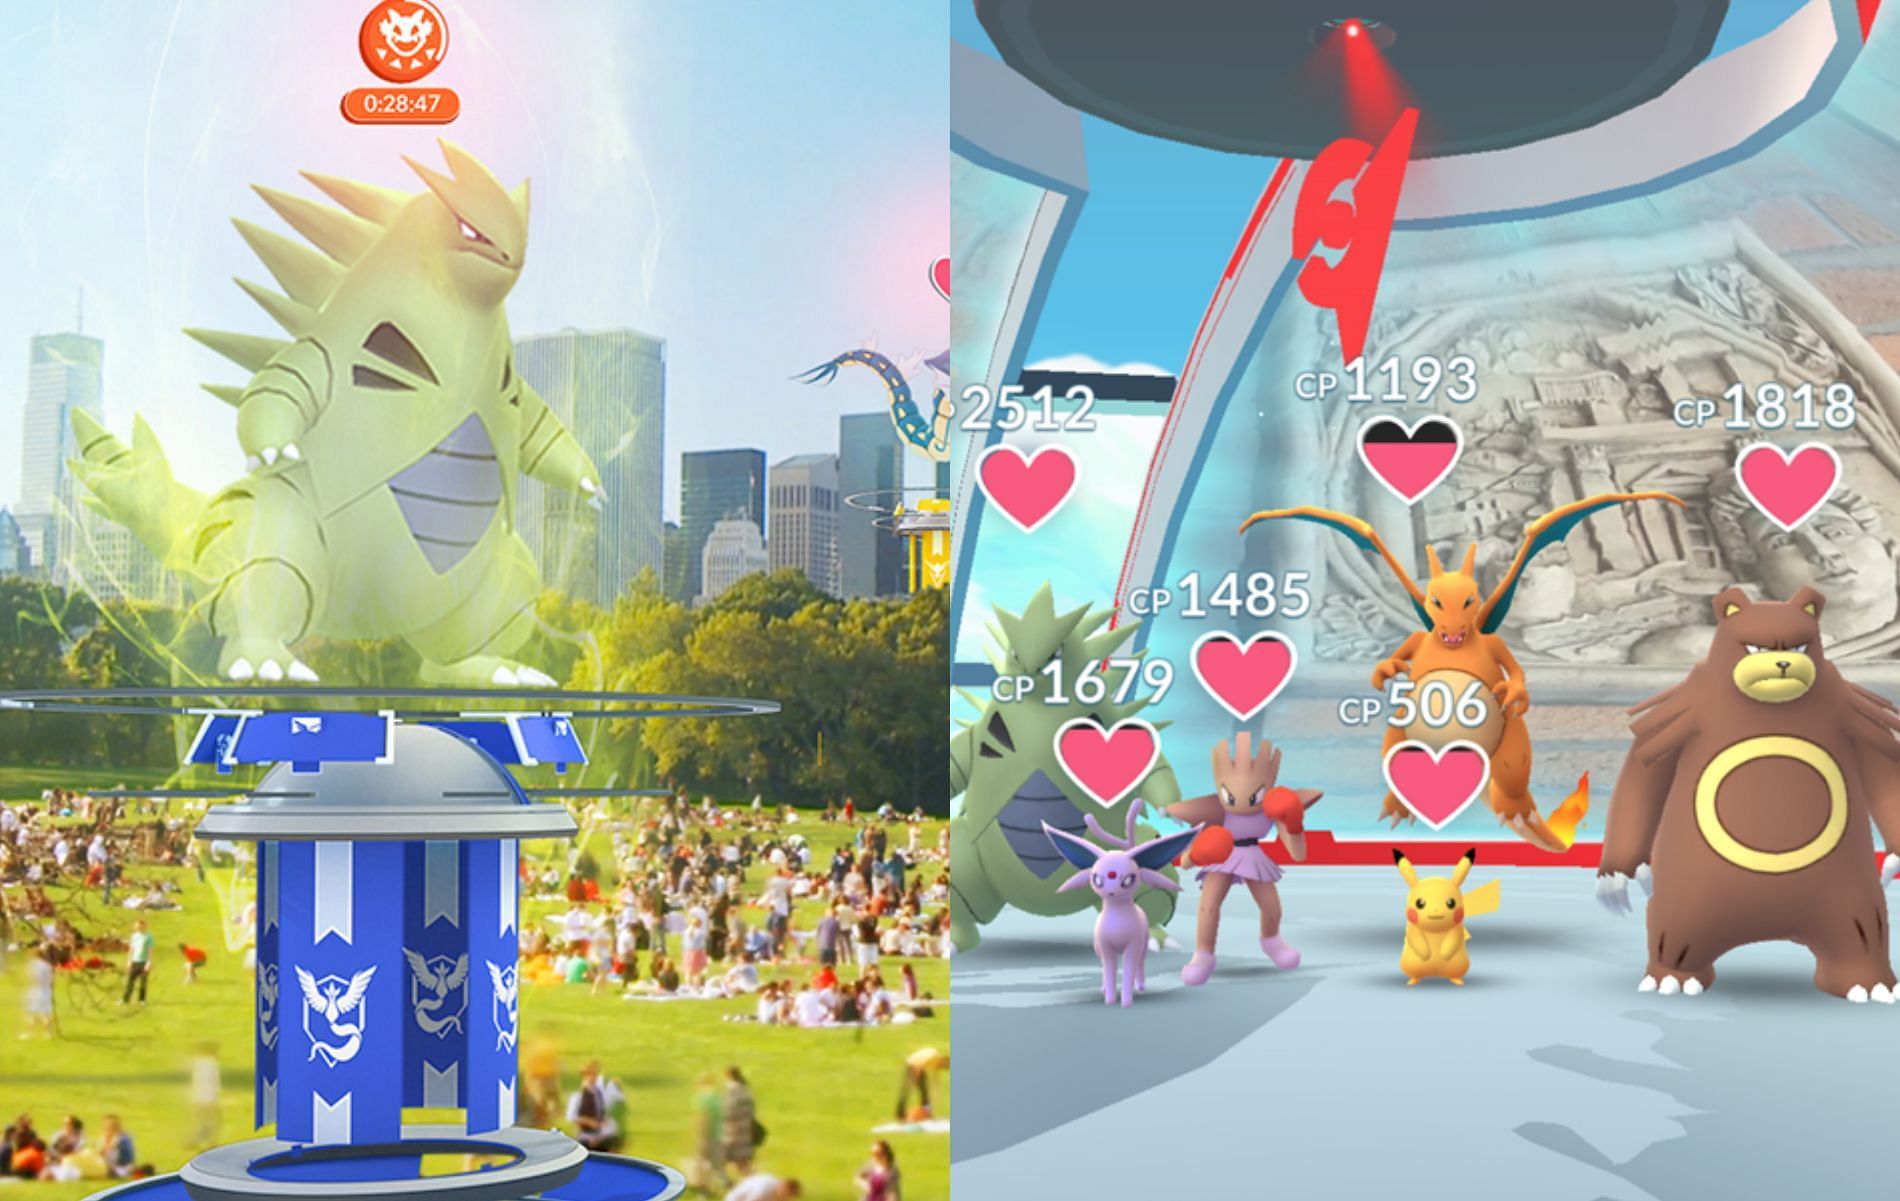 Players are able to assign their Pokemon to Gyms that allign with their faction (Images via Niantic)